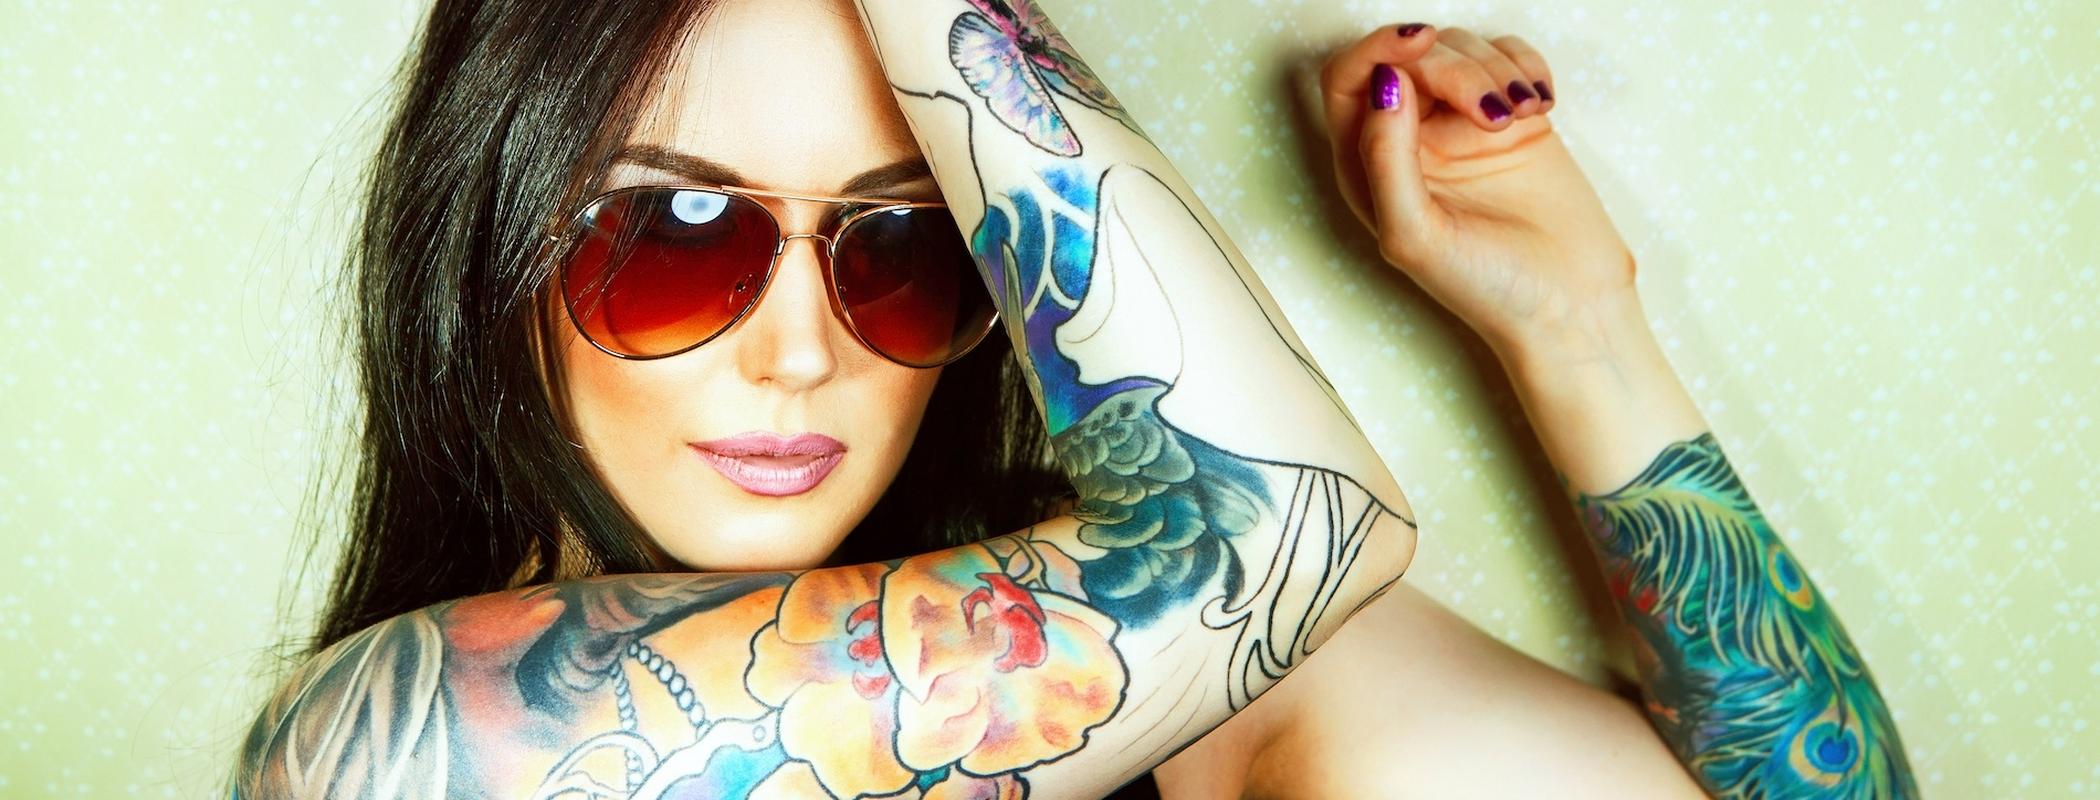 🌟Models Needed for tattoo removal WITH NEW COMBINE TECHNIQUE, Lifestyle  Services, Beauty & Health Services on Carousell